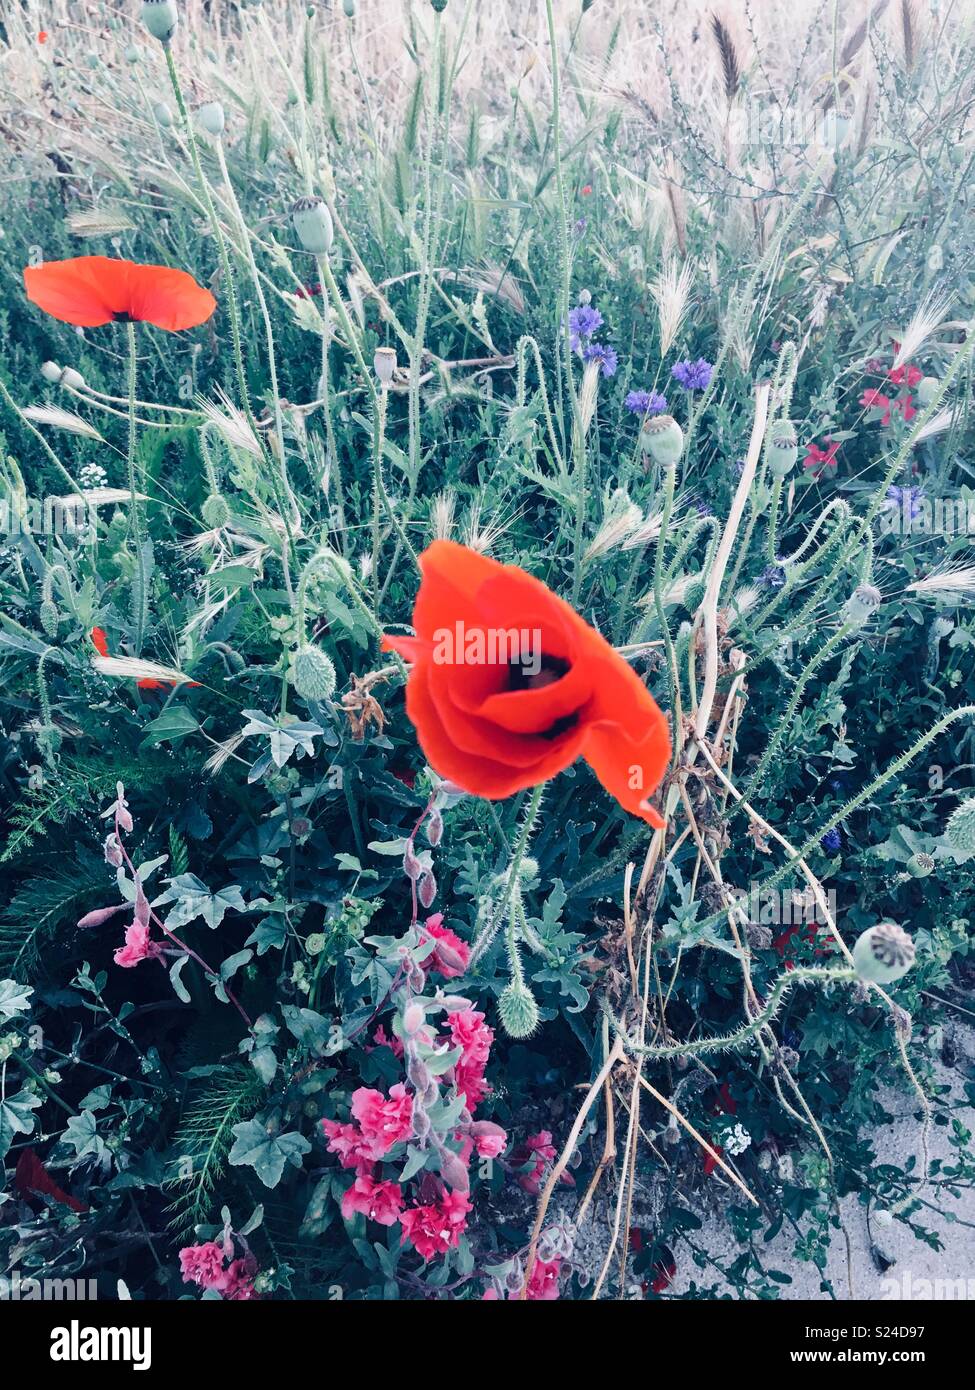 Urban Wildflowers and Bright Red Scarlet Poppies Spring Mix of Flowers Stock Photo